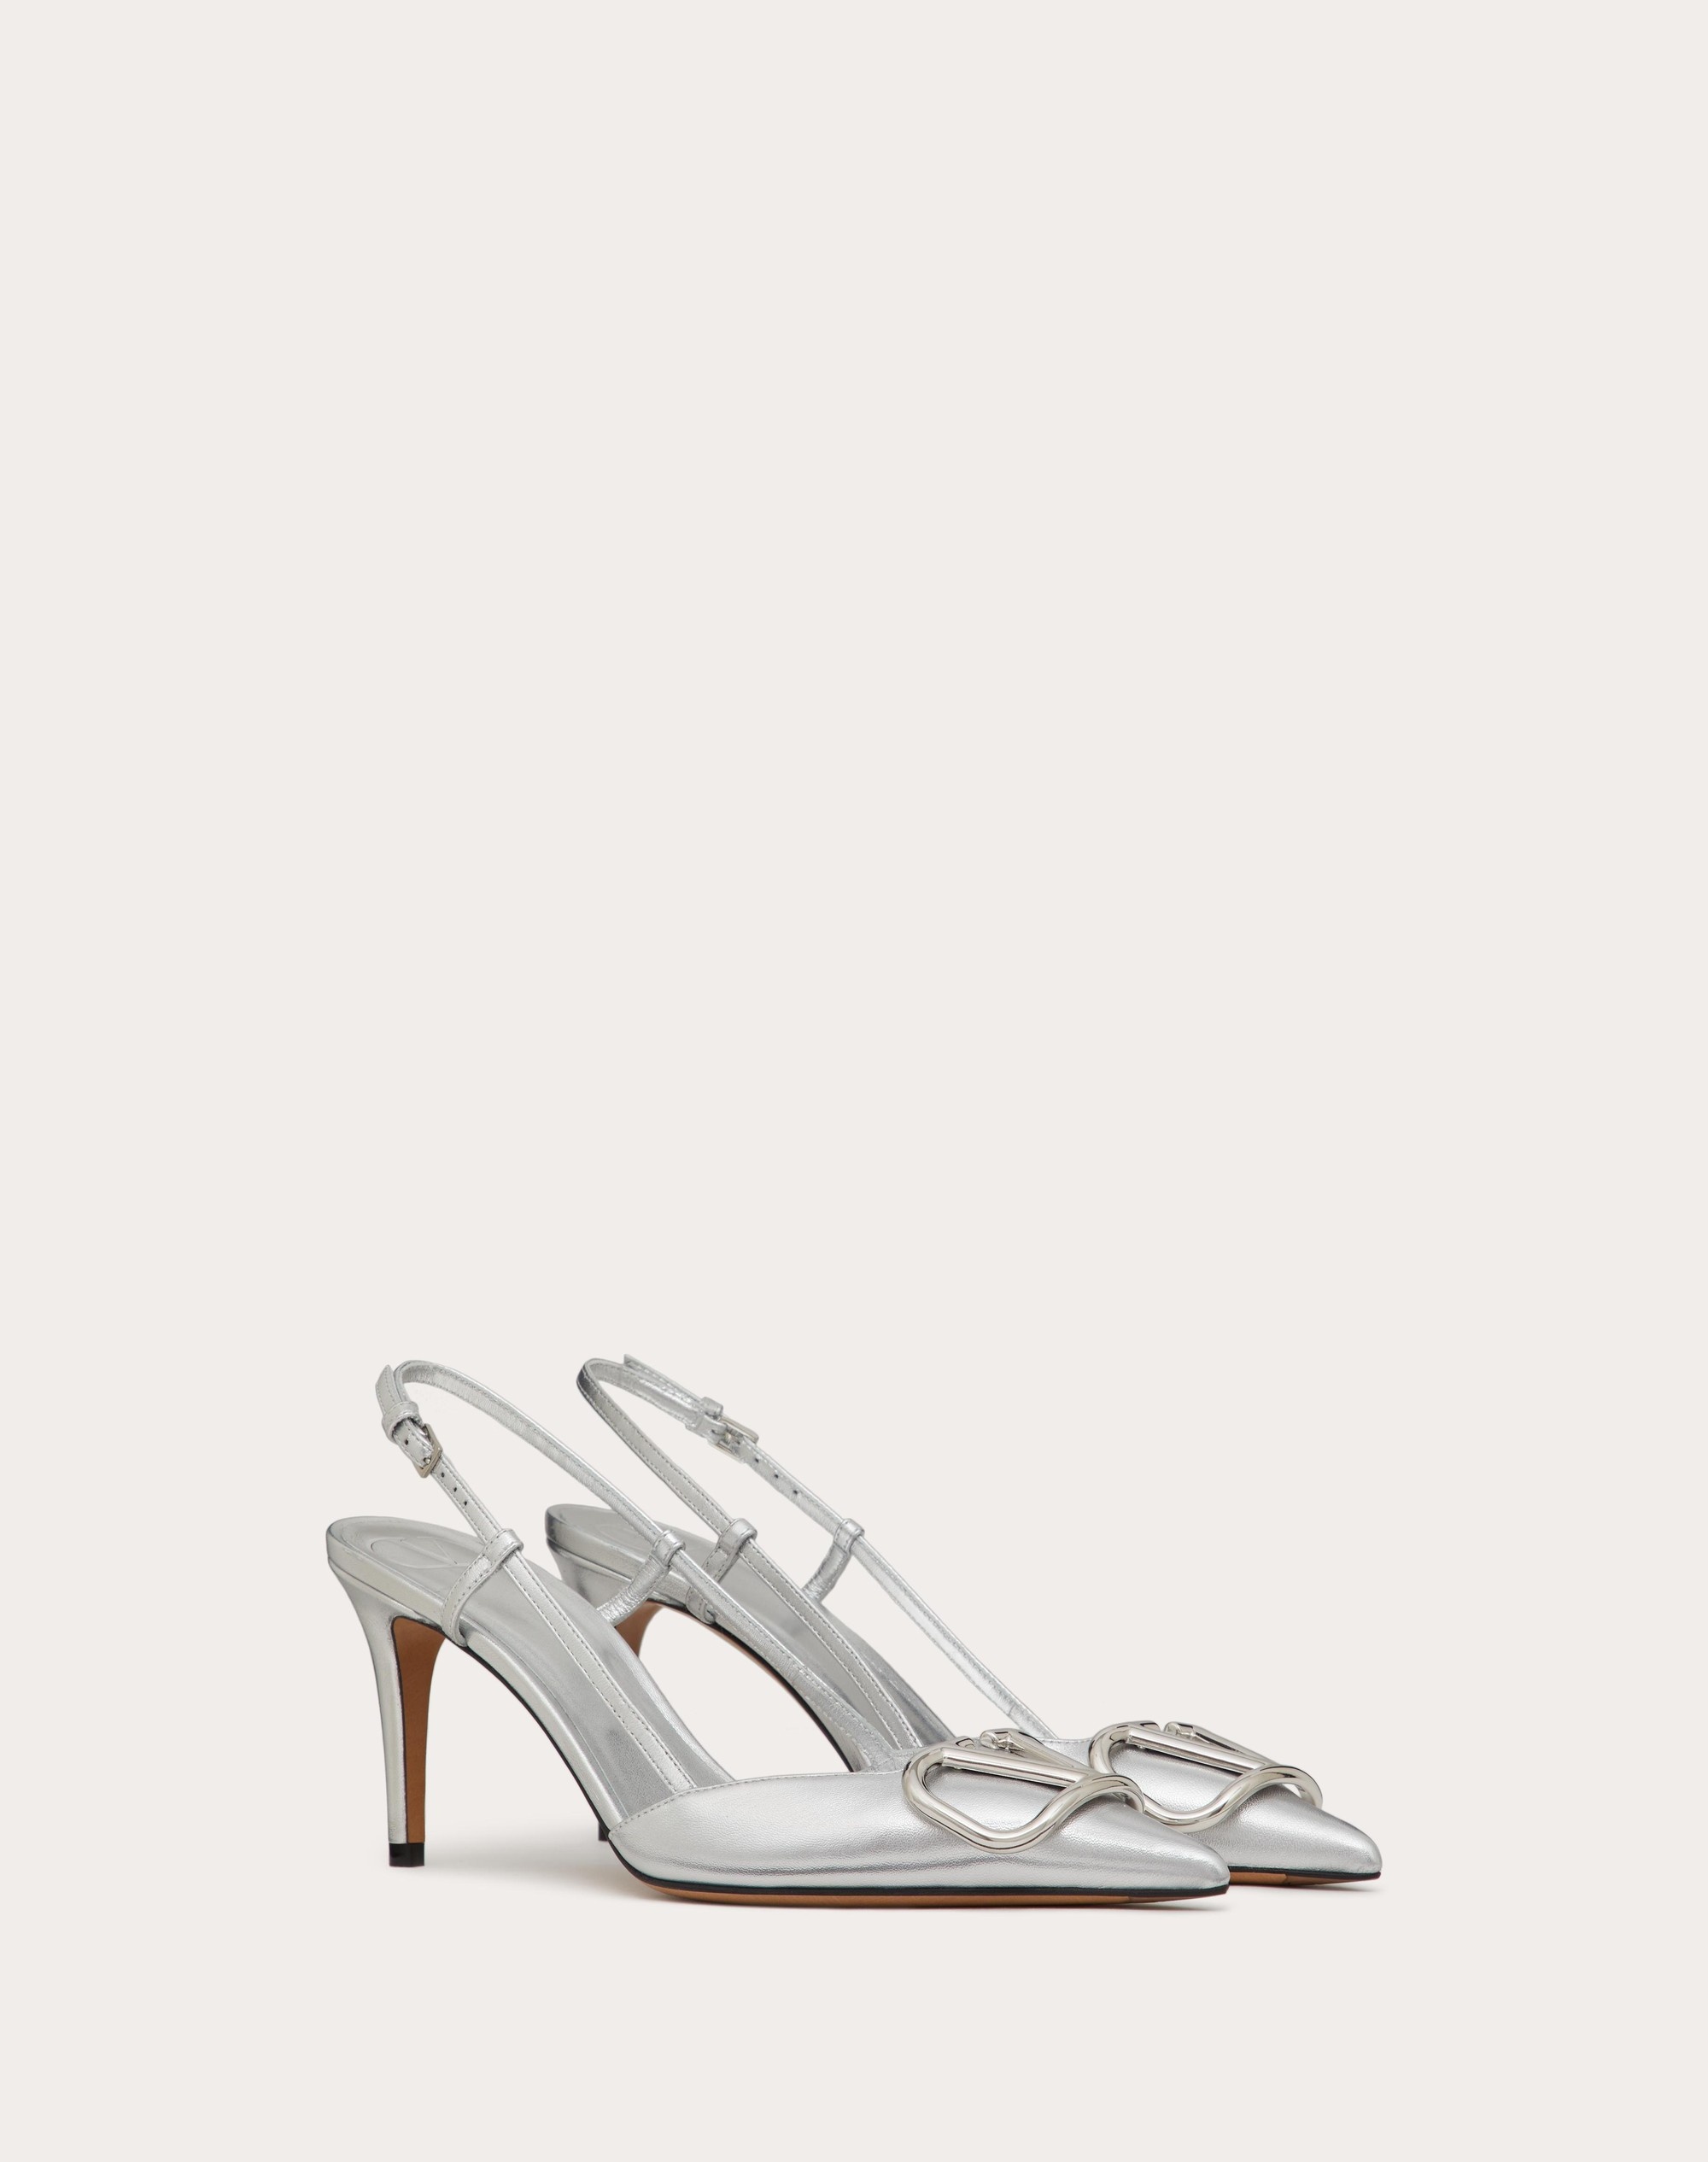 VLOGO SIGNATURE SLINGBACK PUMP IN LAMINATED NAPPA LEATHER 80MM - 2